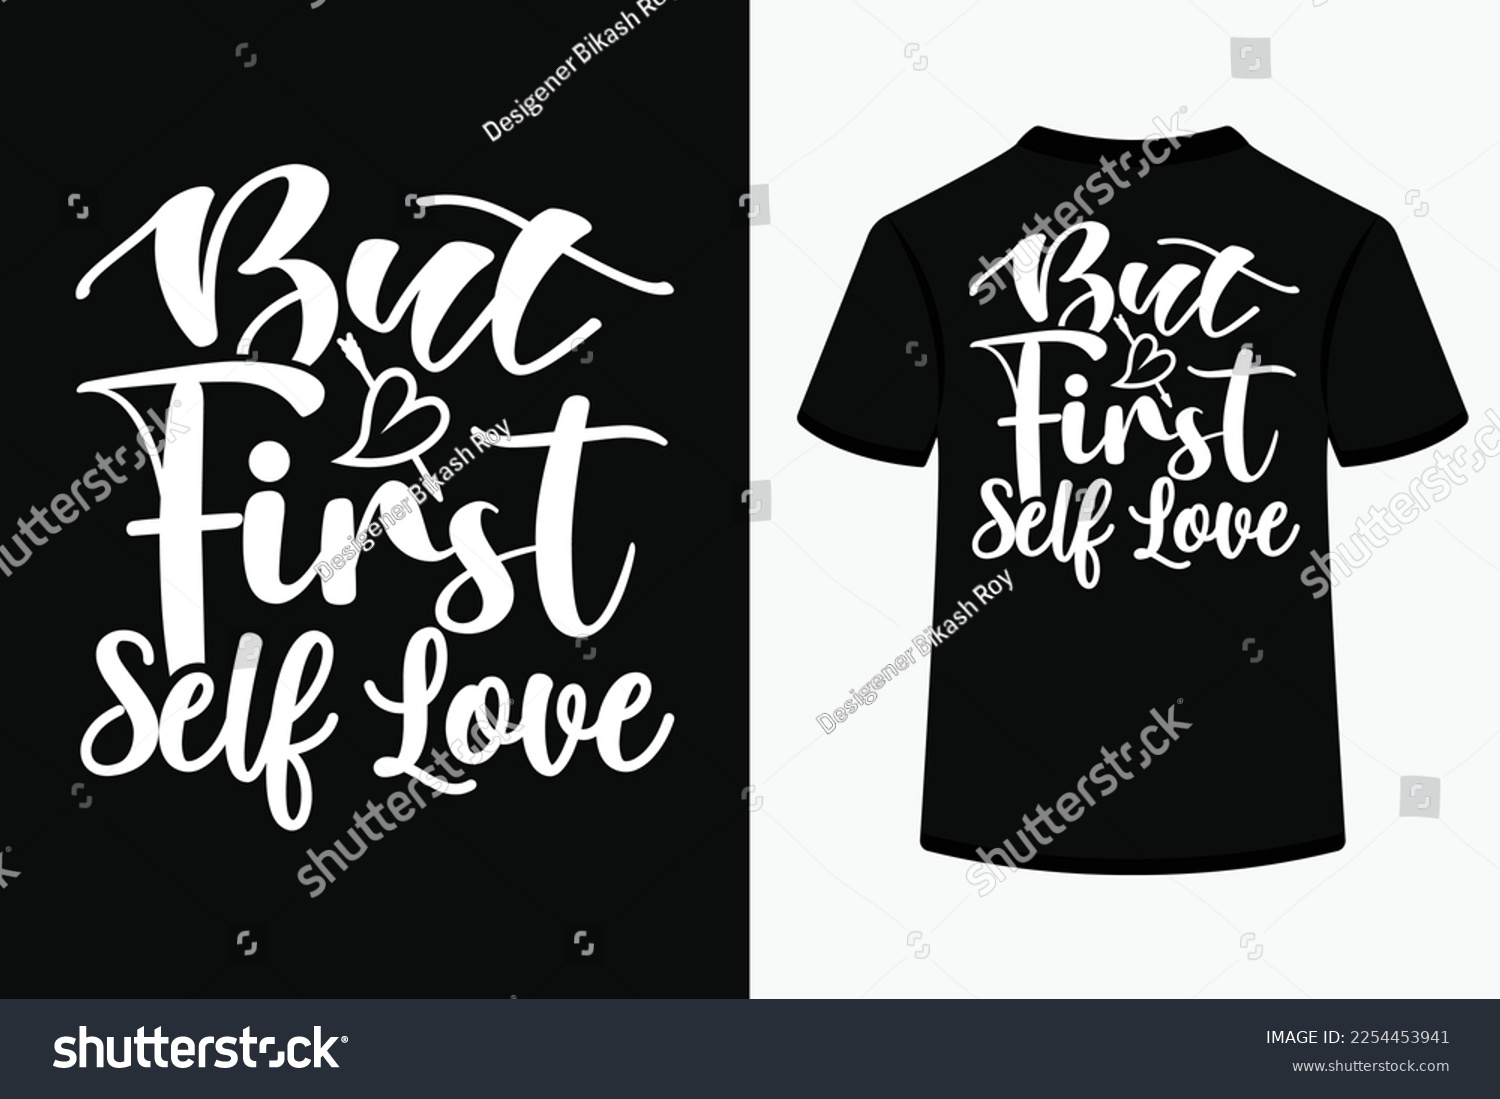 SVG of But First Self Love SVG Tshirt Design Specially for valentine Day.This is a an Editable And Printable High Quality Vector File. svg